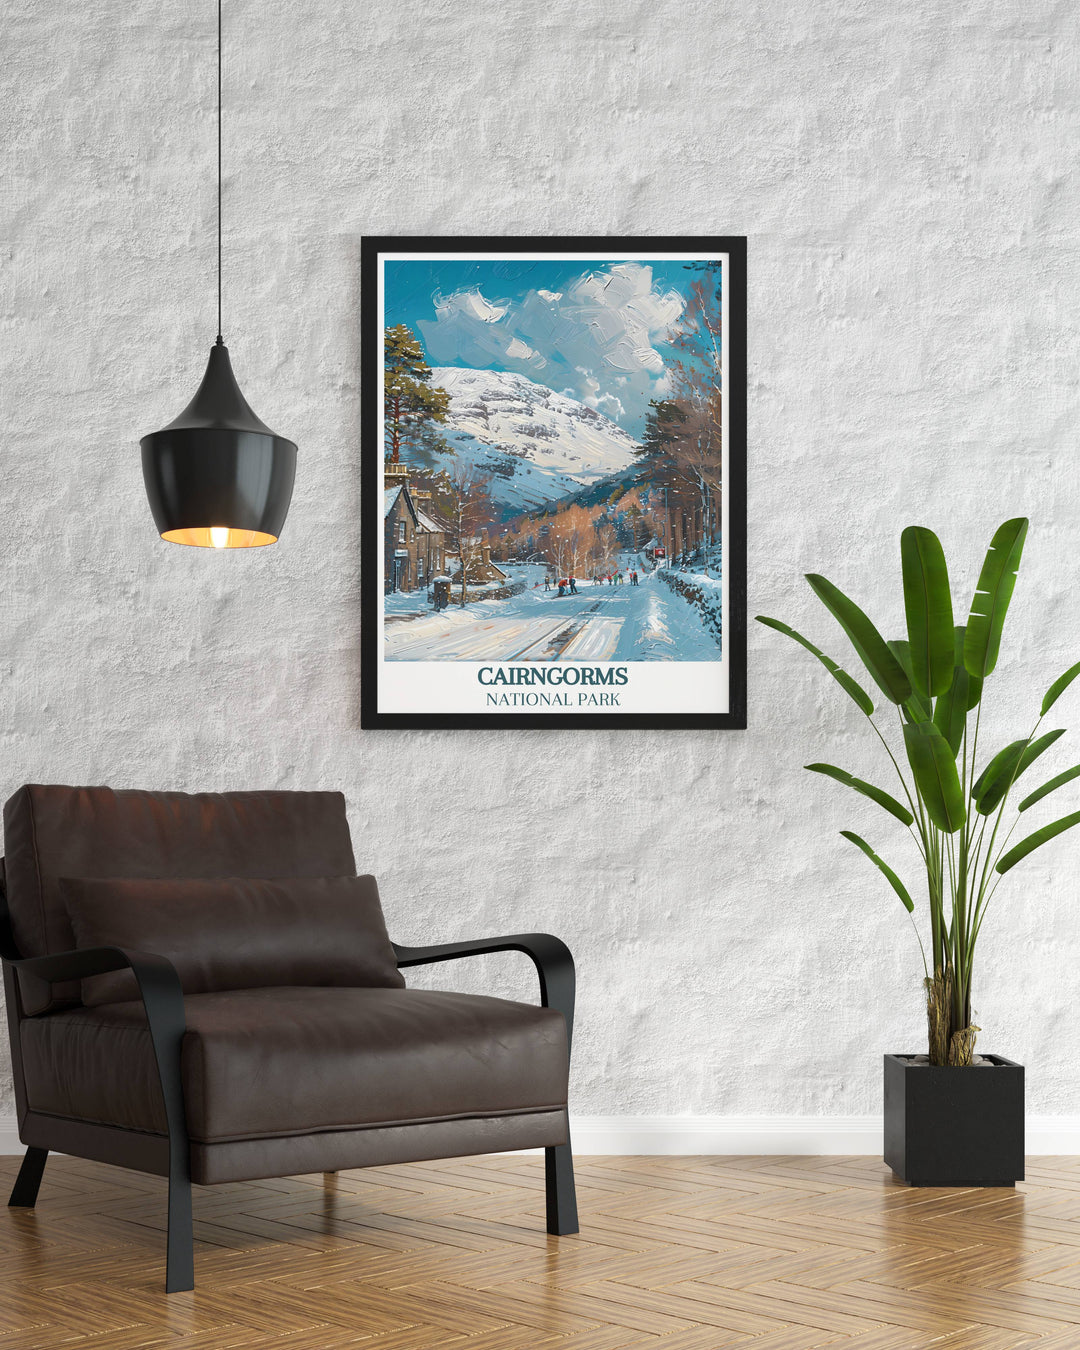 Scotland Print featuring the majestic Cairngorm Mountain and the Cairngorms. This national park print is a perfect addition to any art collection, offering a glimpse into the beauty of the Highlands